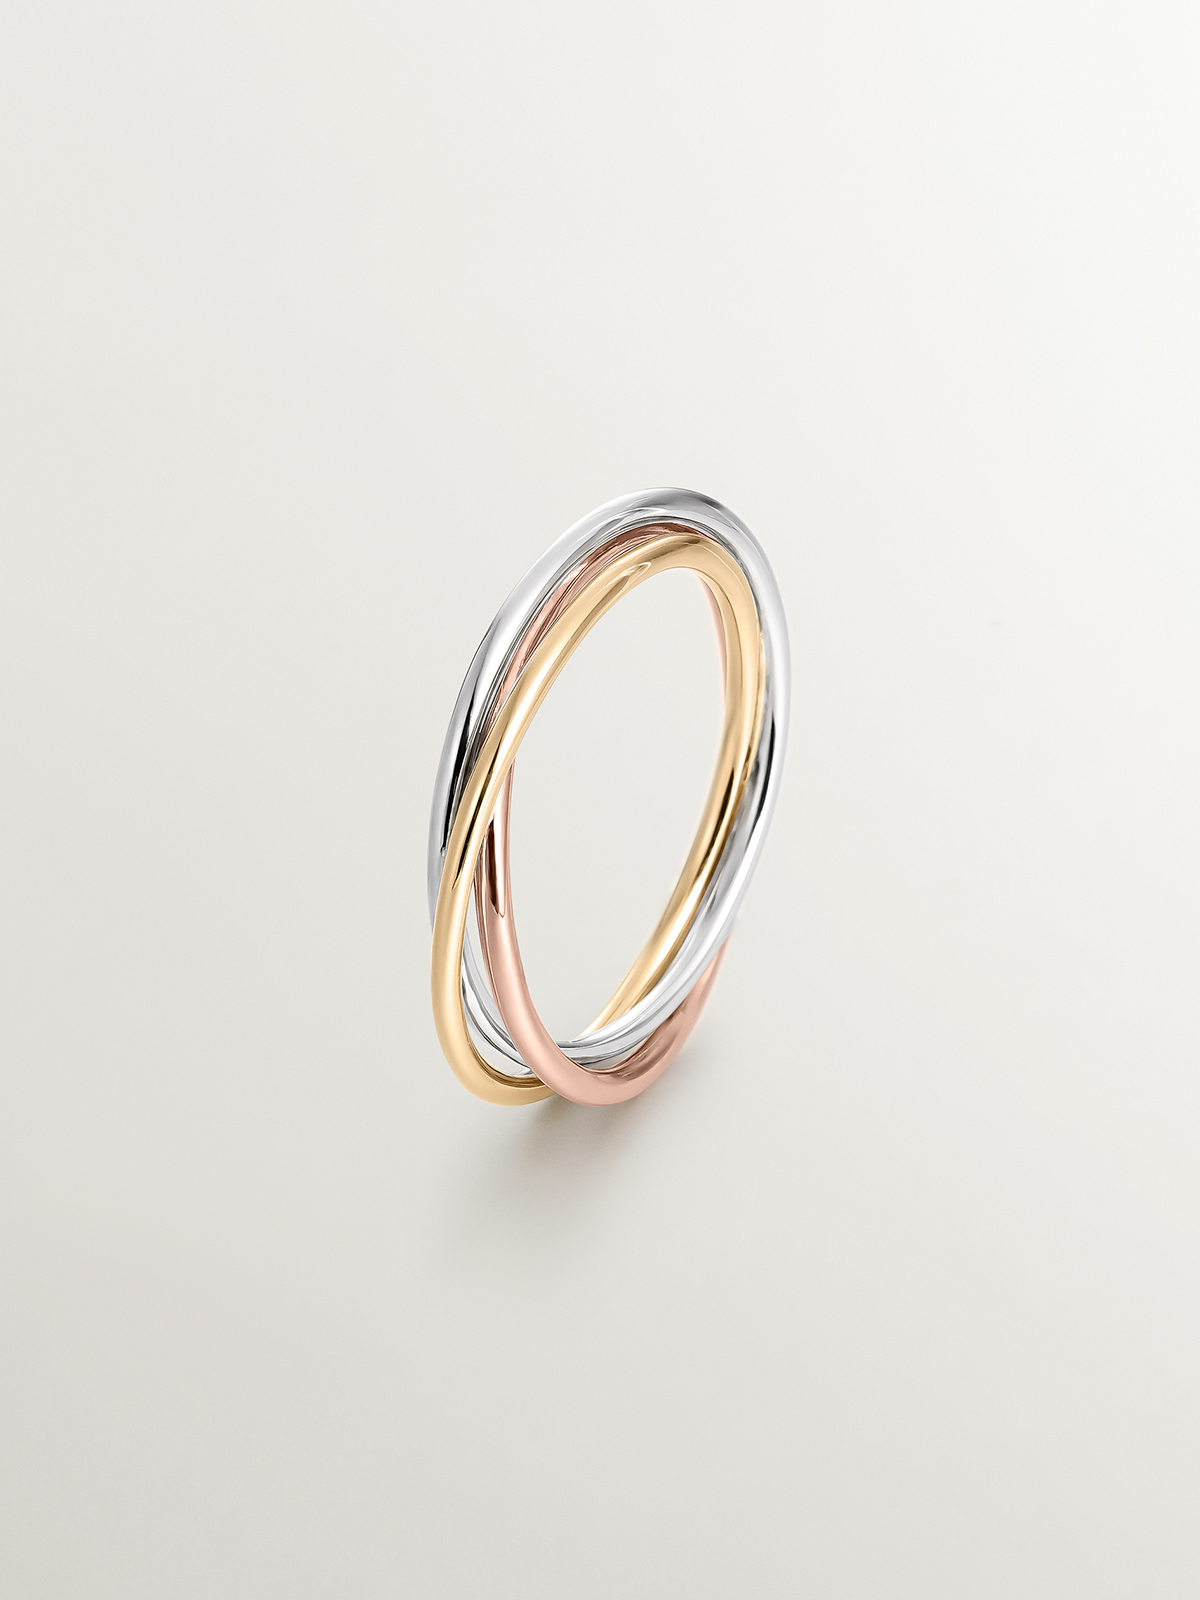 9K White, Yellow and Rose Gold Triple Ring